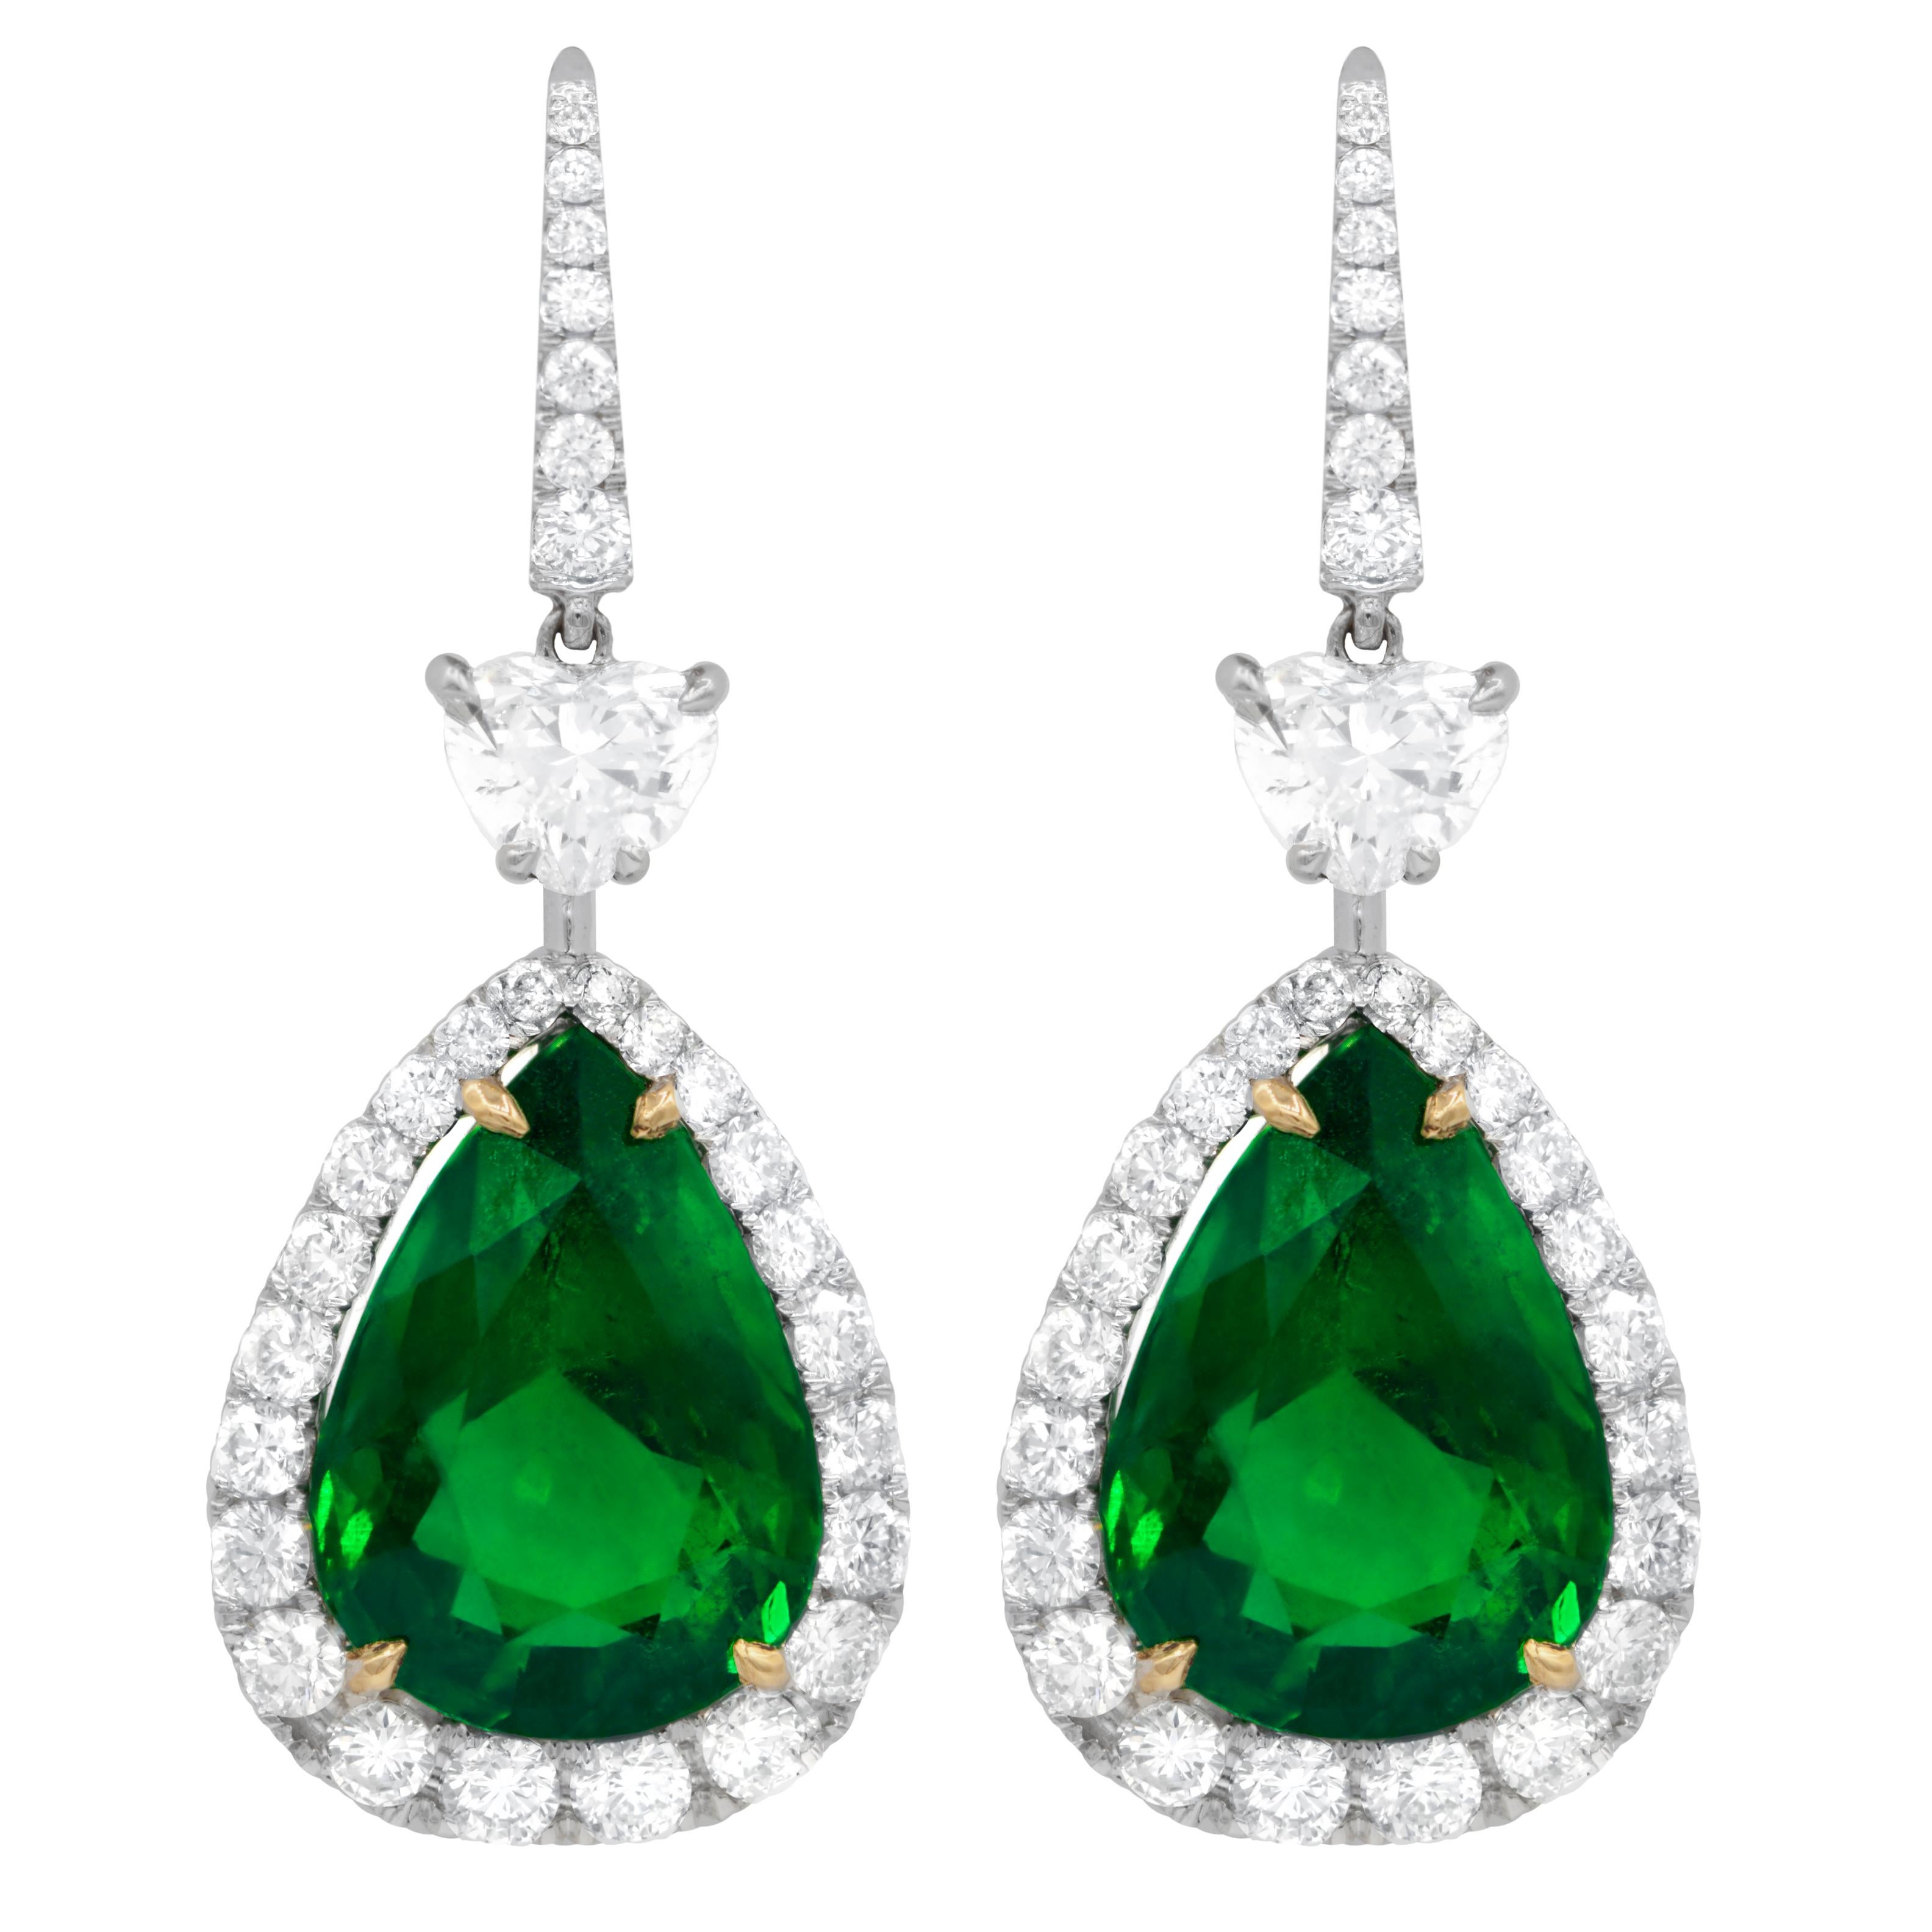 18kt white gold pear shape emerald earrings features: 15.34ct emeralds, in a halo  with 2 gia certified hearts e vs2  with total of 3.76ct of white diamonds.
